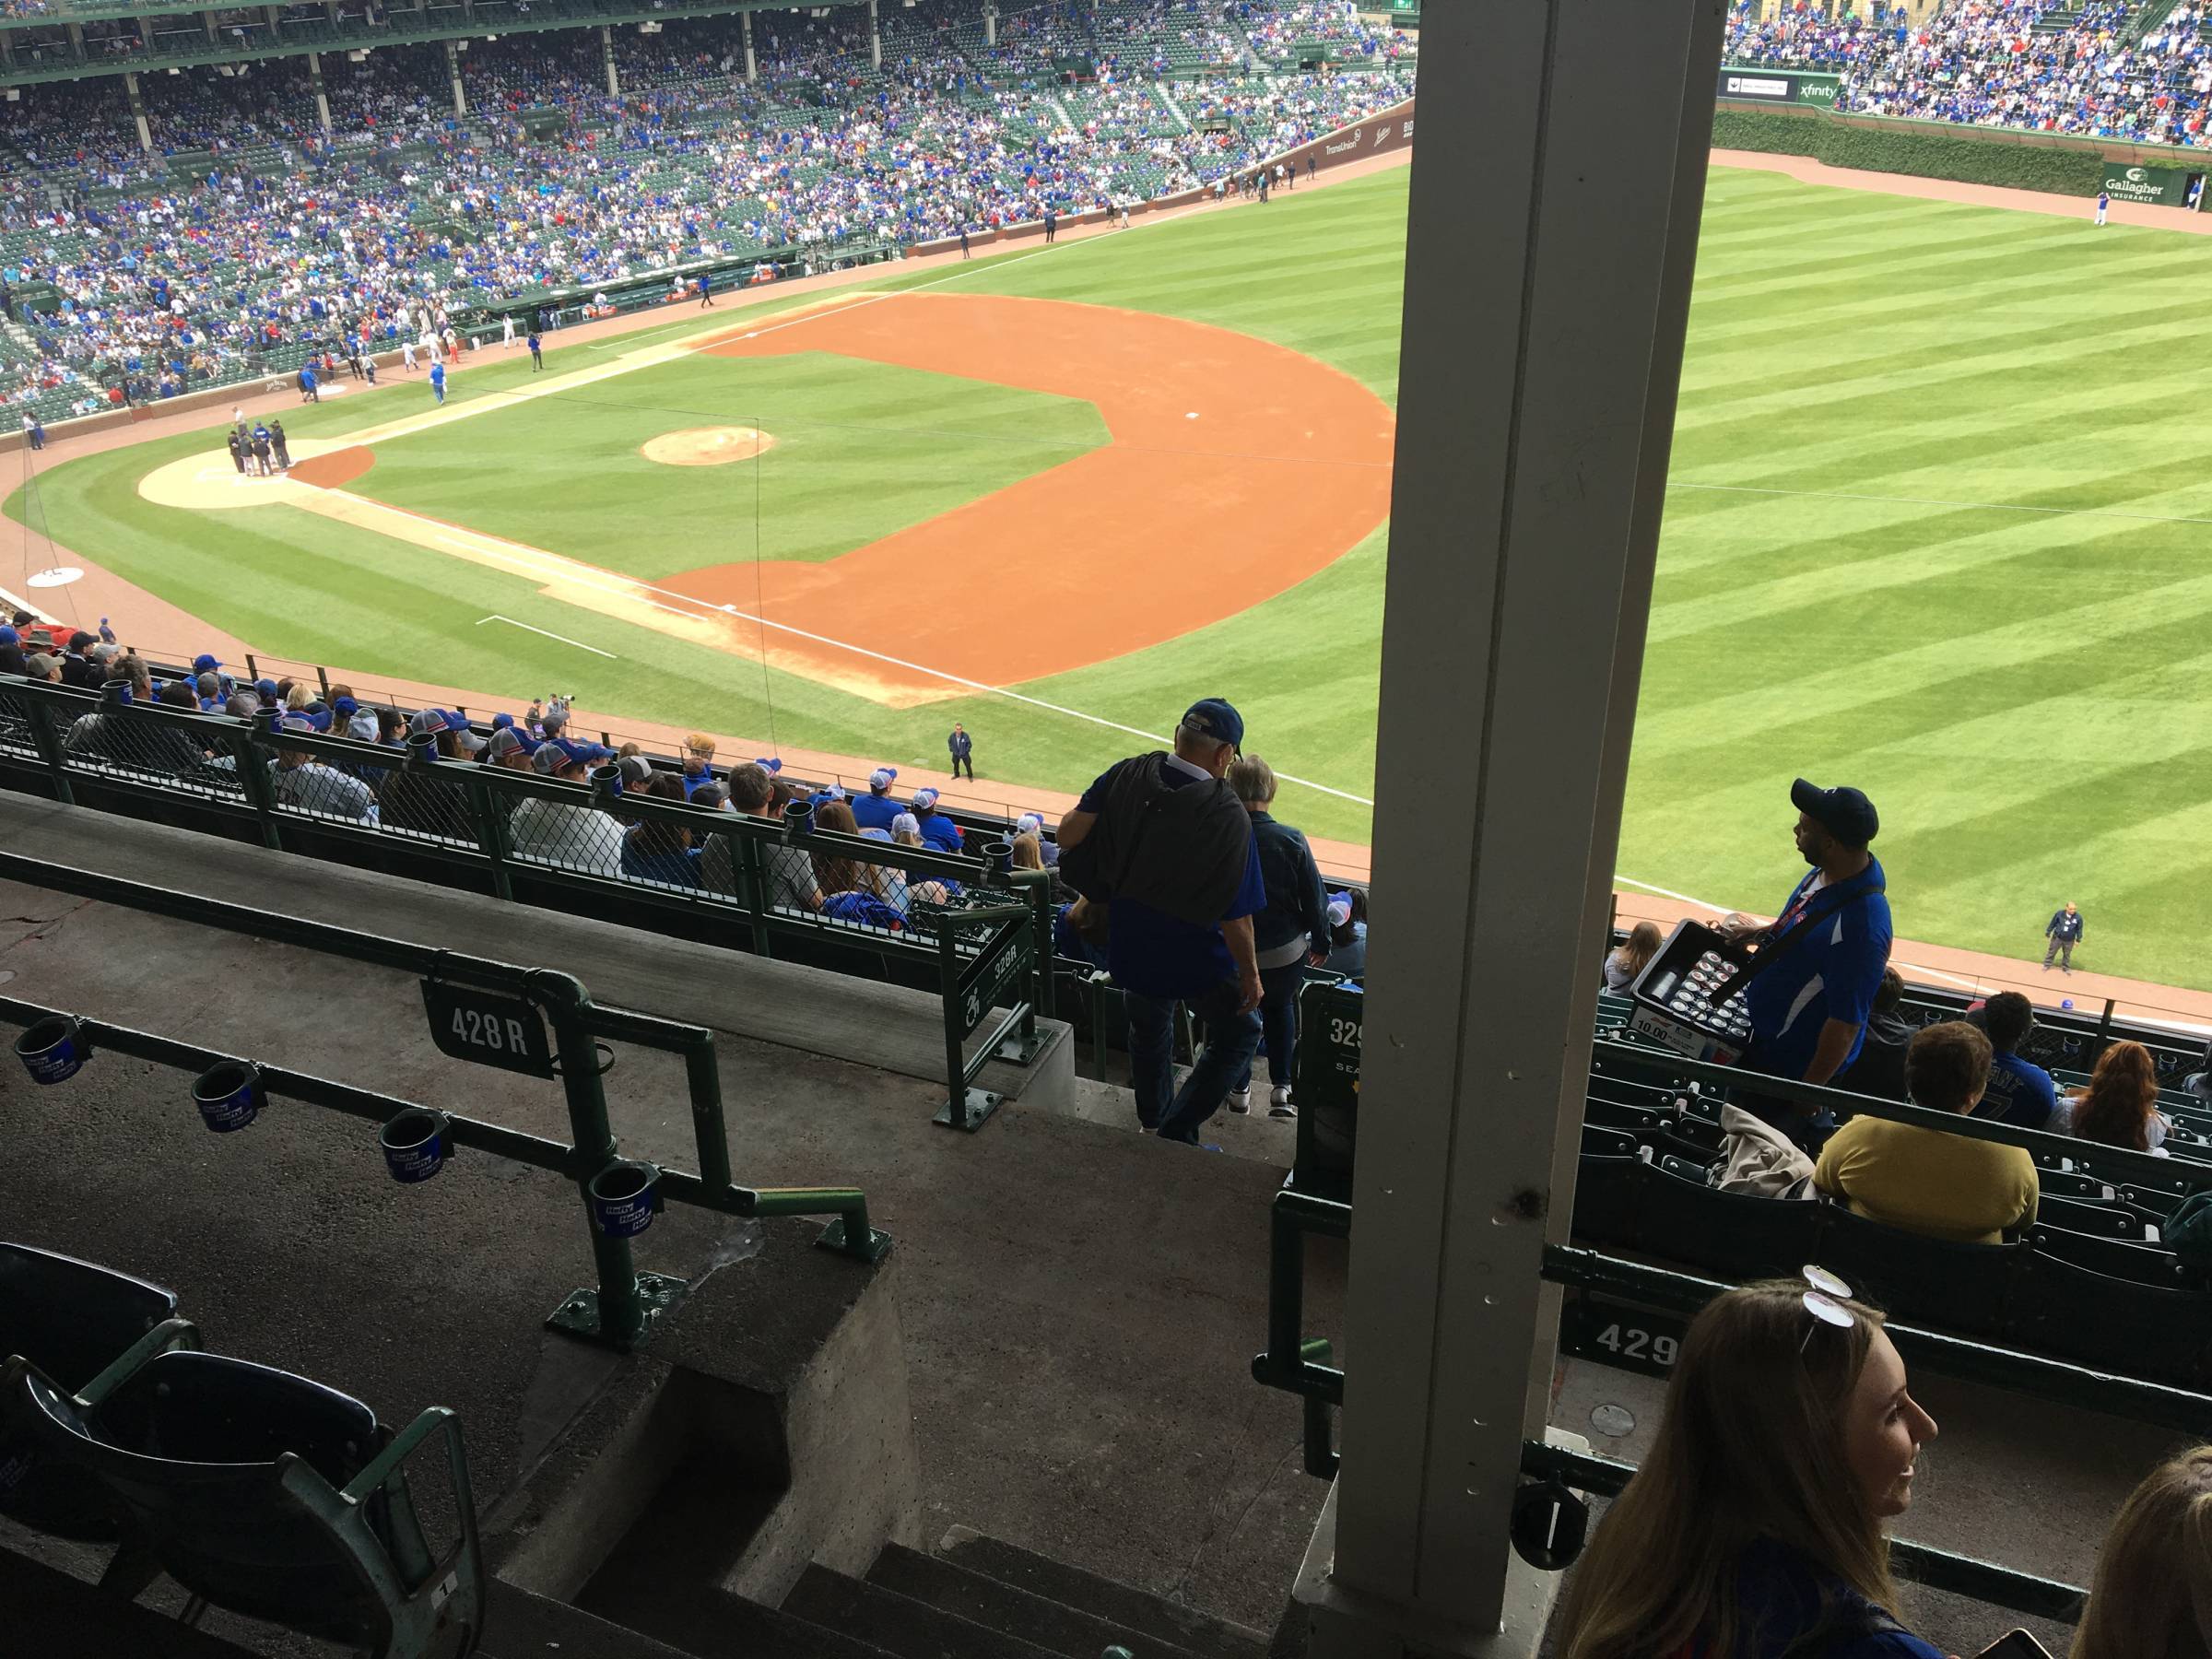 Pole in Section 429R at Wrigley Field